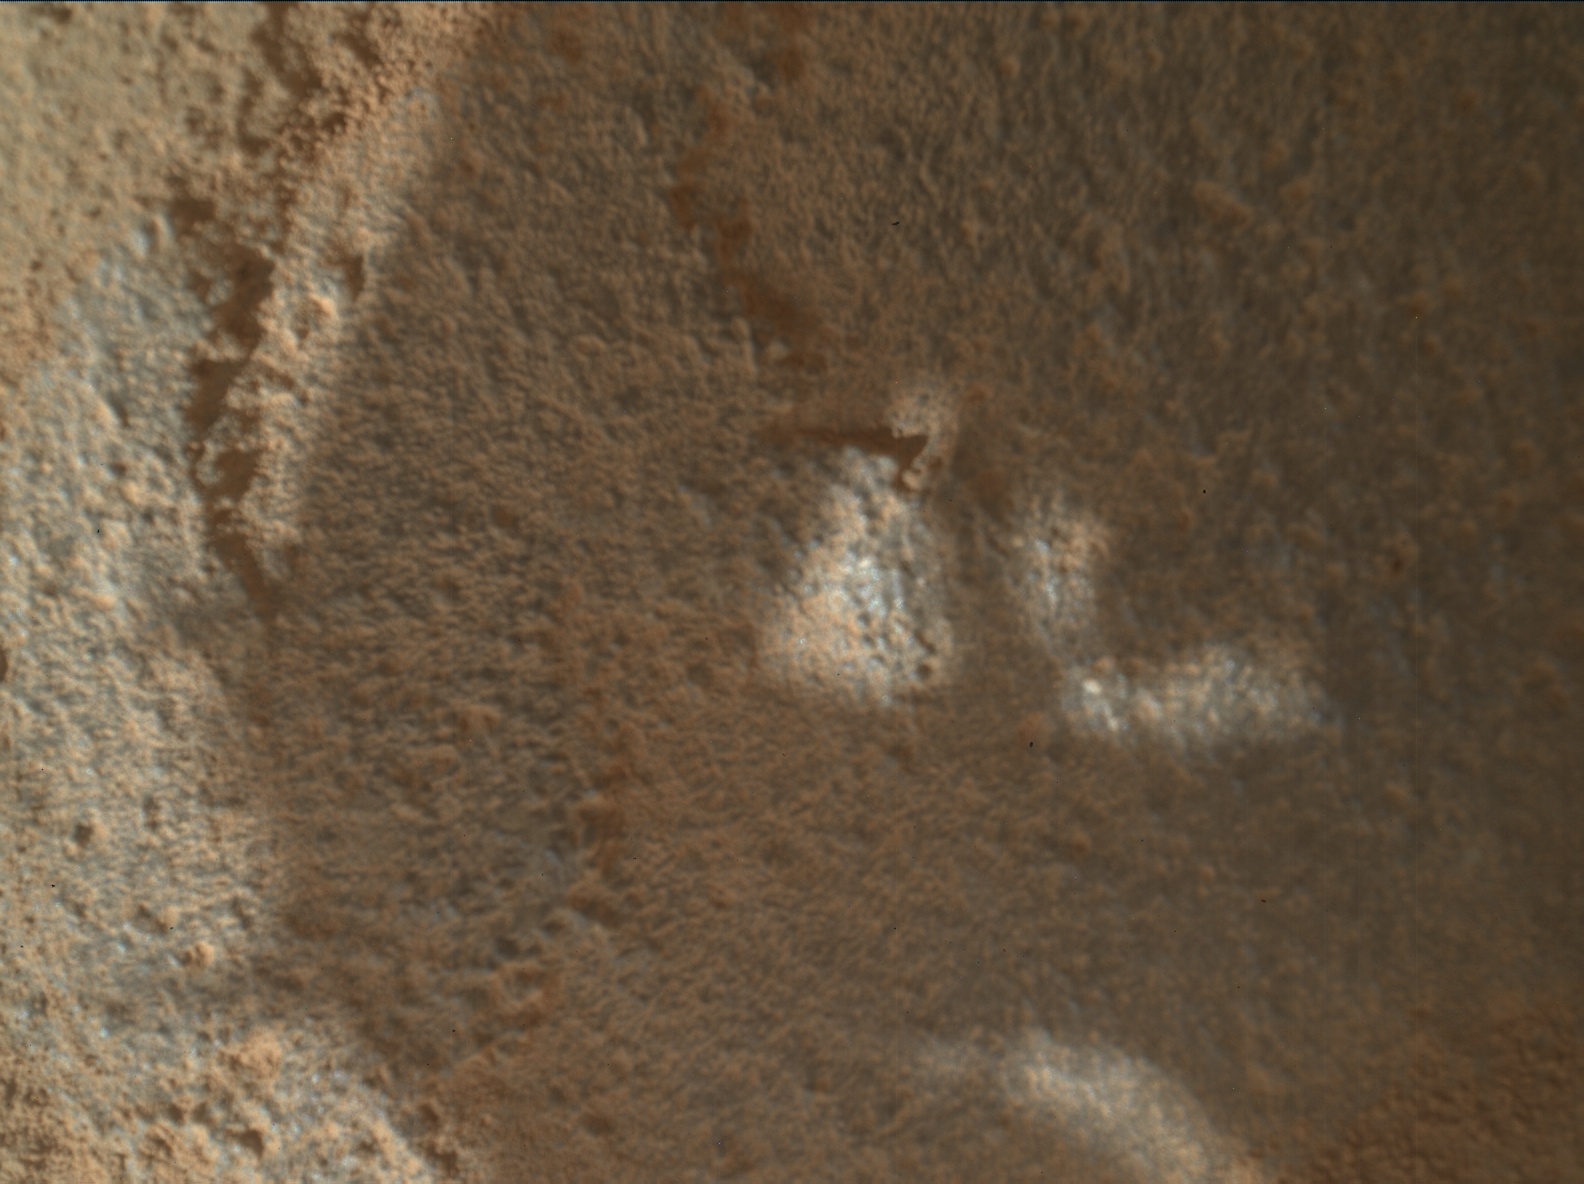 Nasa's Mars rover Curiosity acquired this image using its Mars Hand Lens Imager (MAHLI) on Sol 2706